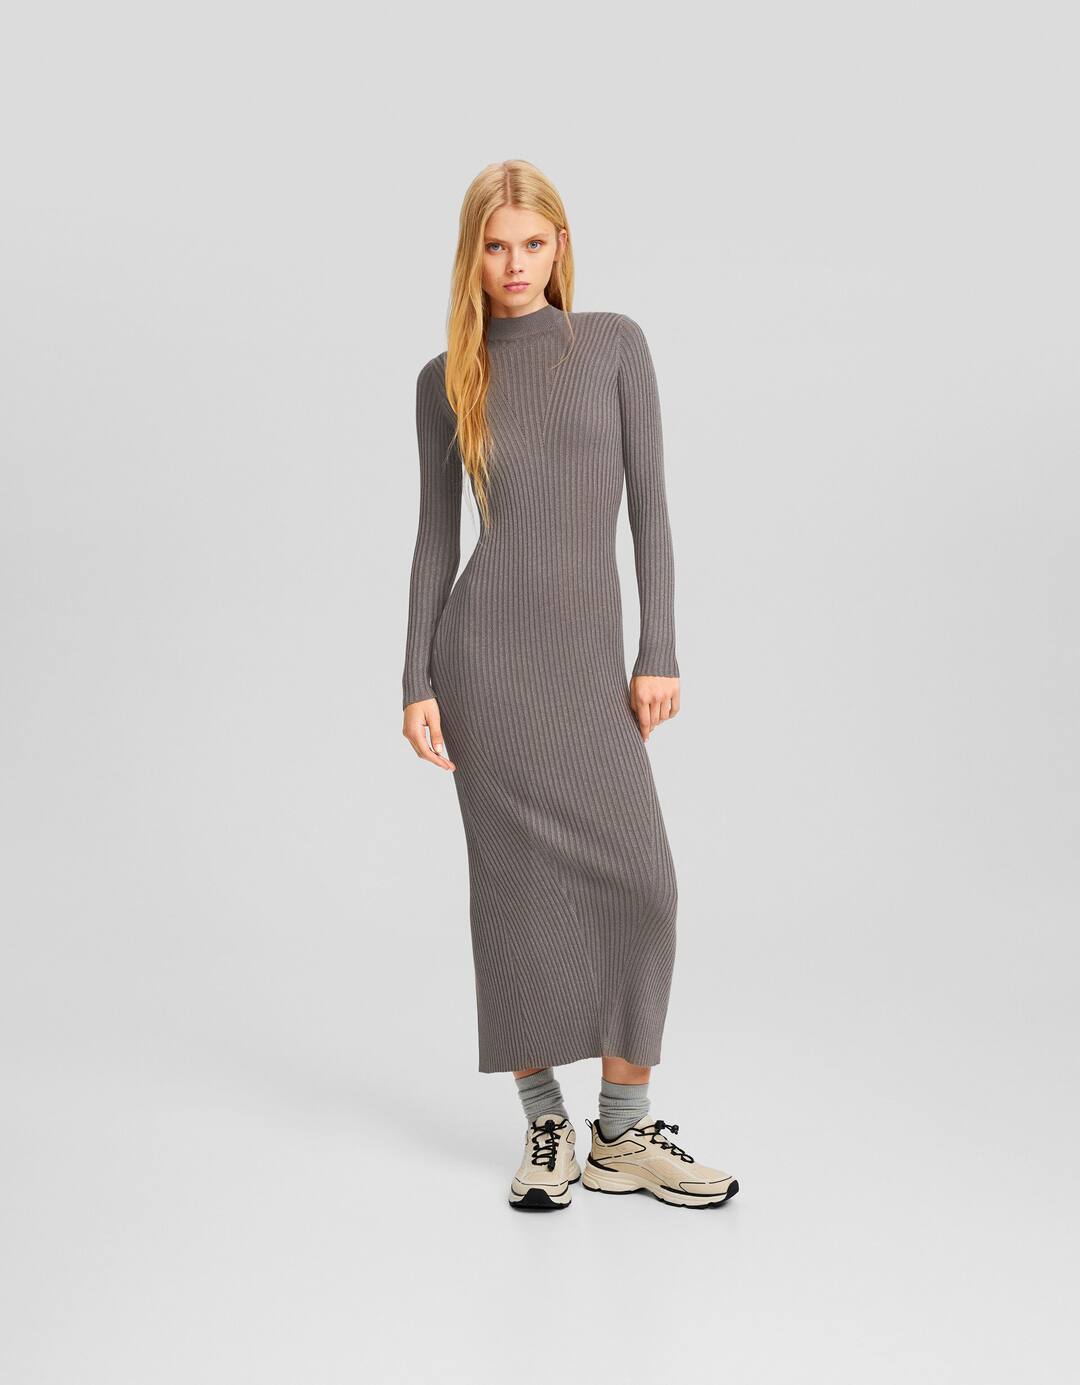 Shimmery knit high neck midi dress with long sleeves